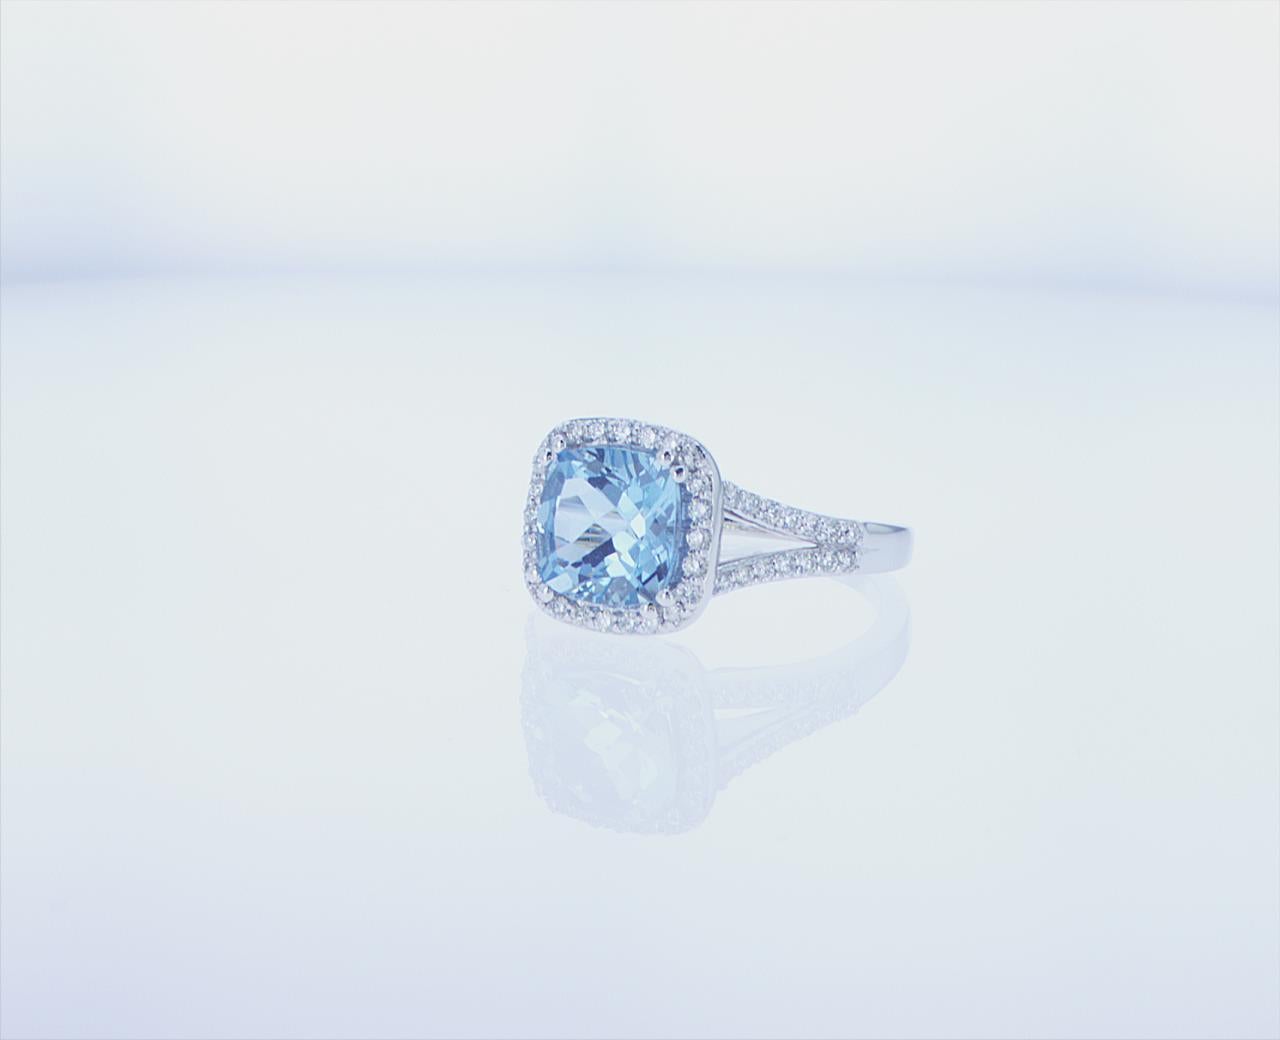 2.08ct Cushion Shaped Aqua Cocktail Ring with Split Diamond Shank featuring 0.40ct total weight of G/H Color, VS Clarity Round Brilliant Diamonds in a 14k White Gold mounting.
